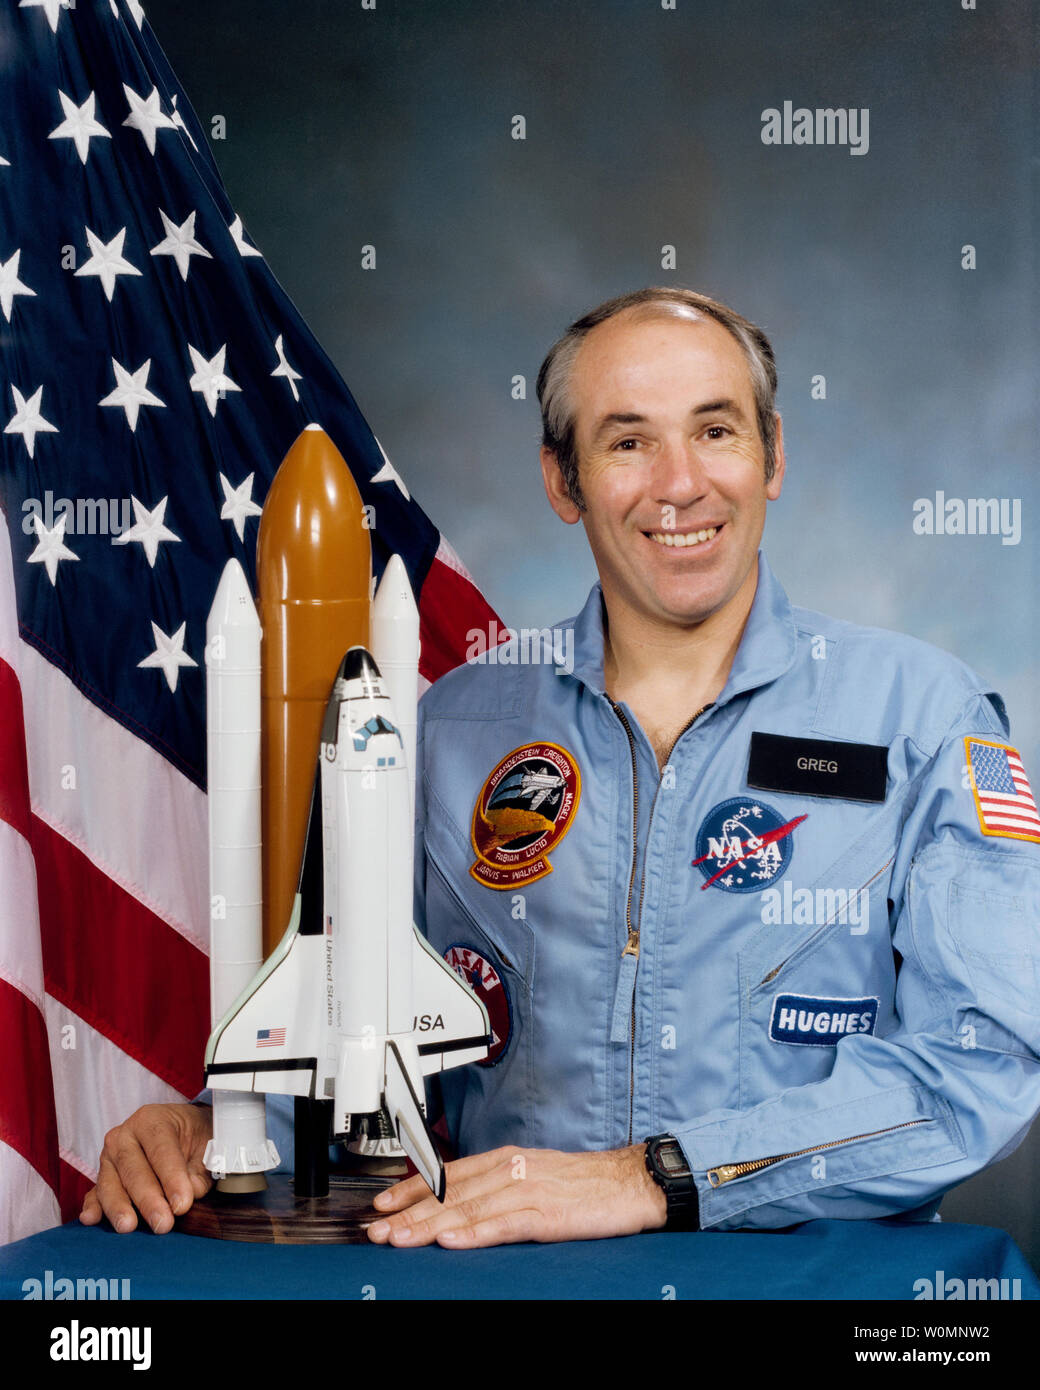 Official NASA portrait, taken in 1985, of Gregory B. Jarvis, Payload Specialist for STS-51-L. On January 28, 1986, at 11:39 a.m. EST, the Space Shuttle Challenger and her seven-member crew were lost when a ruptured O-ring in the right Solid Rocket Booster caused an explosion 73 seconds after launch. UPI Stock Photo